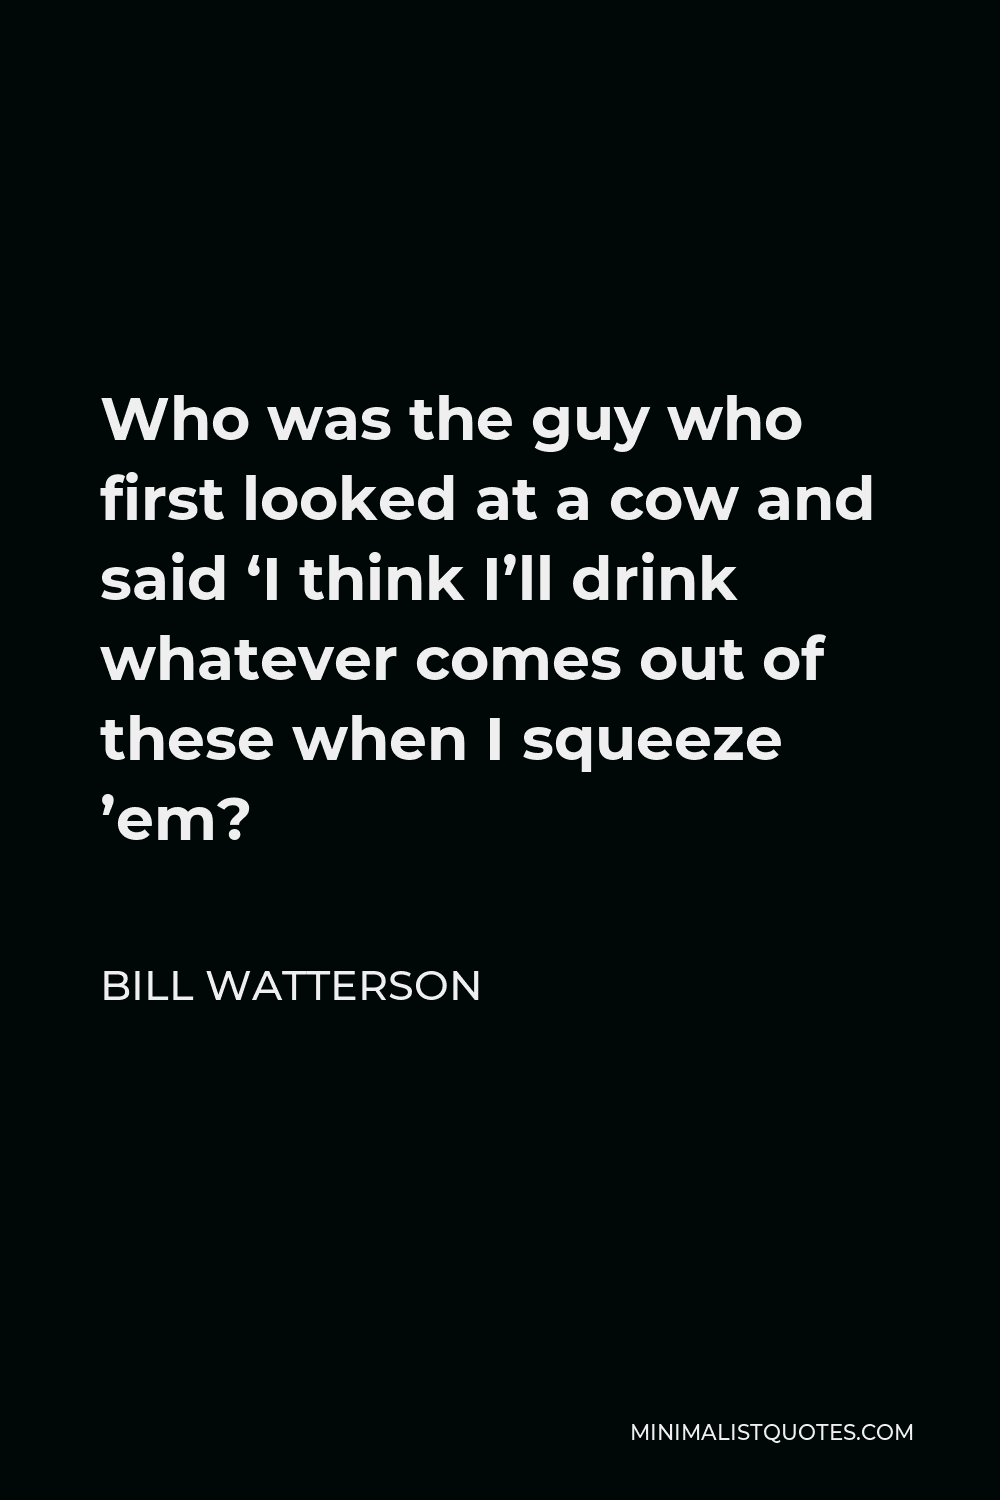 Bill Watterson Quote - Who was the guy who first looked at a cow and said ‘I think I’ll drink whatever comes out of these when I squeeze ’em?